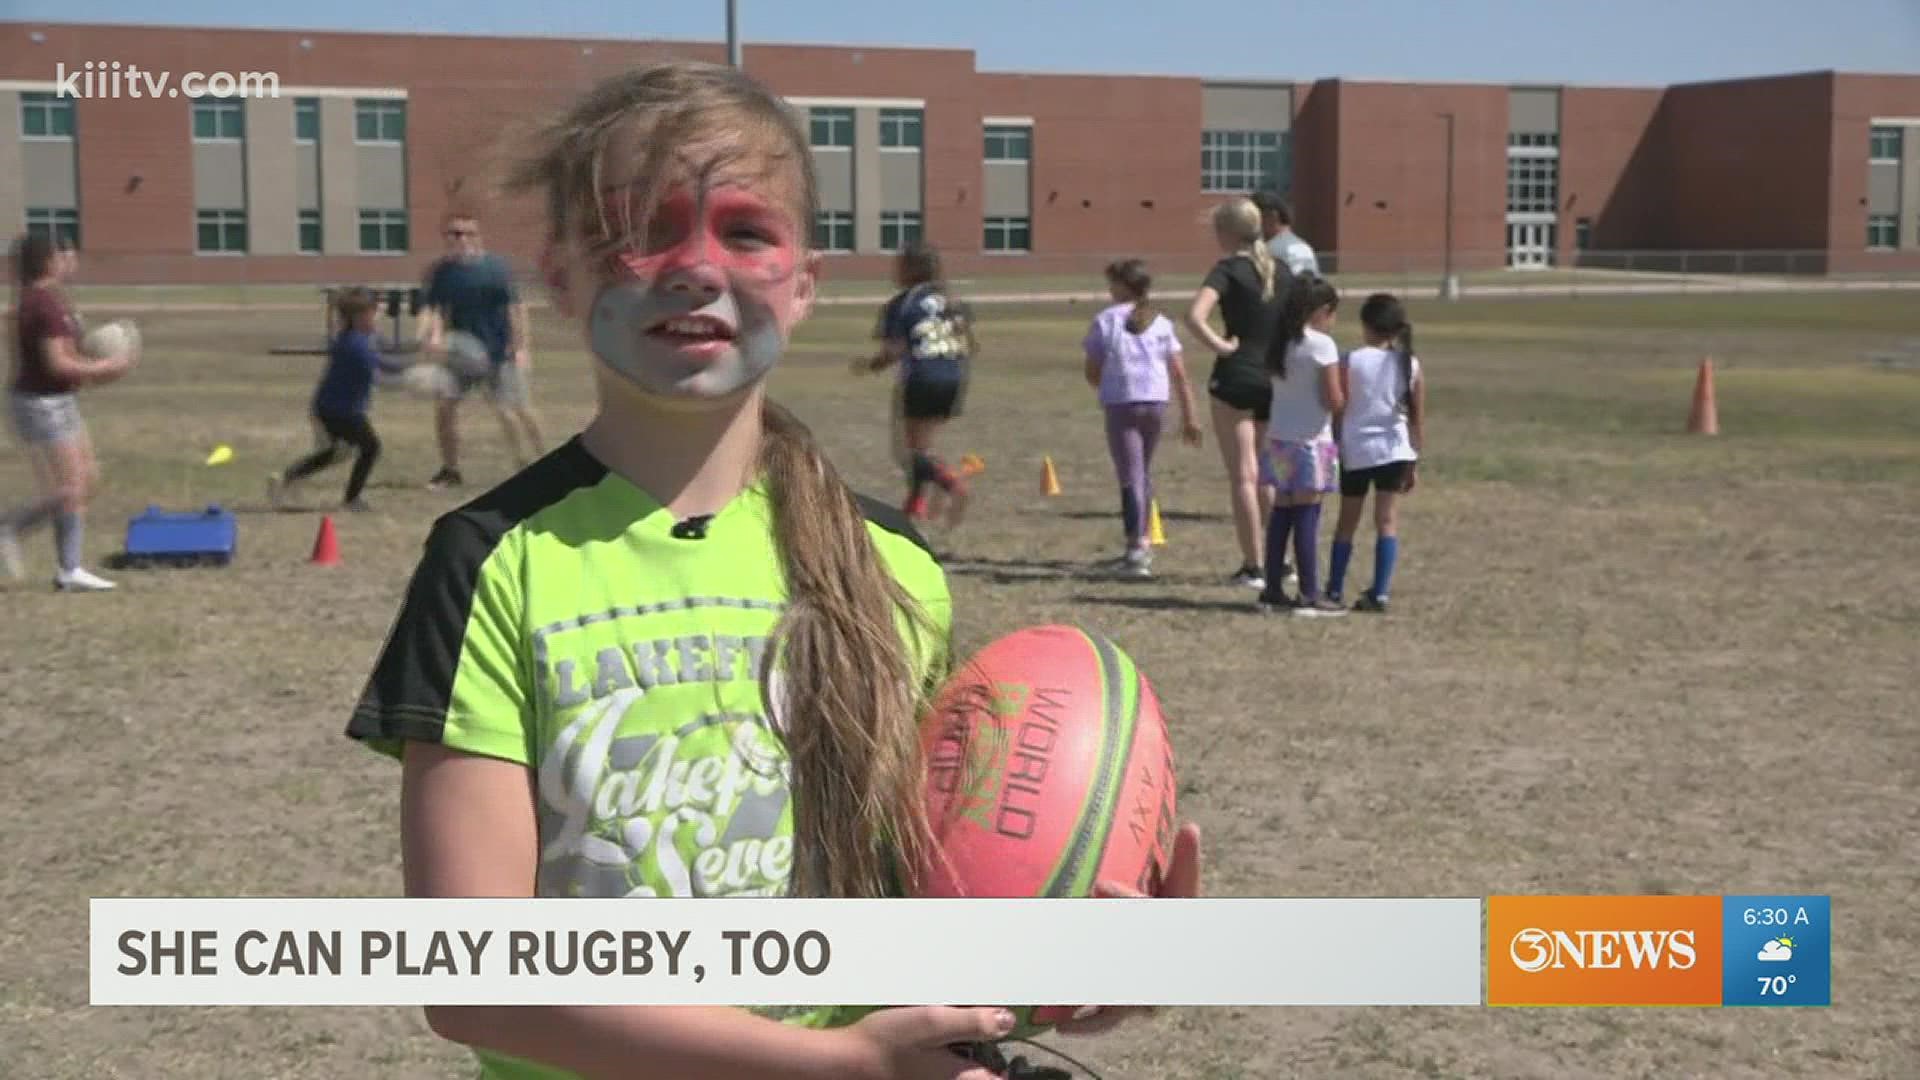 It's often overlooked in the Coastal Bend, but this Rugby League is giving girls a chance to hit the field.